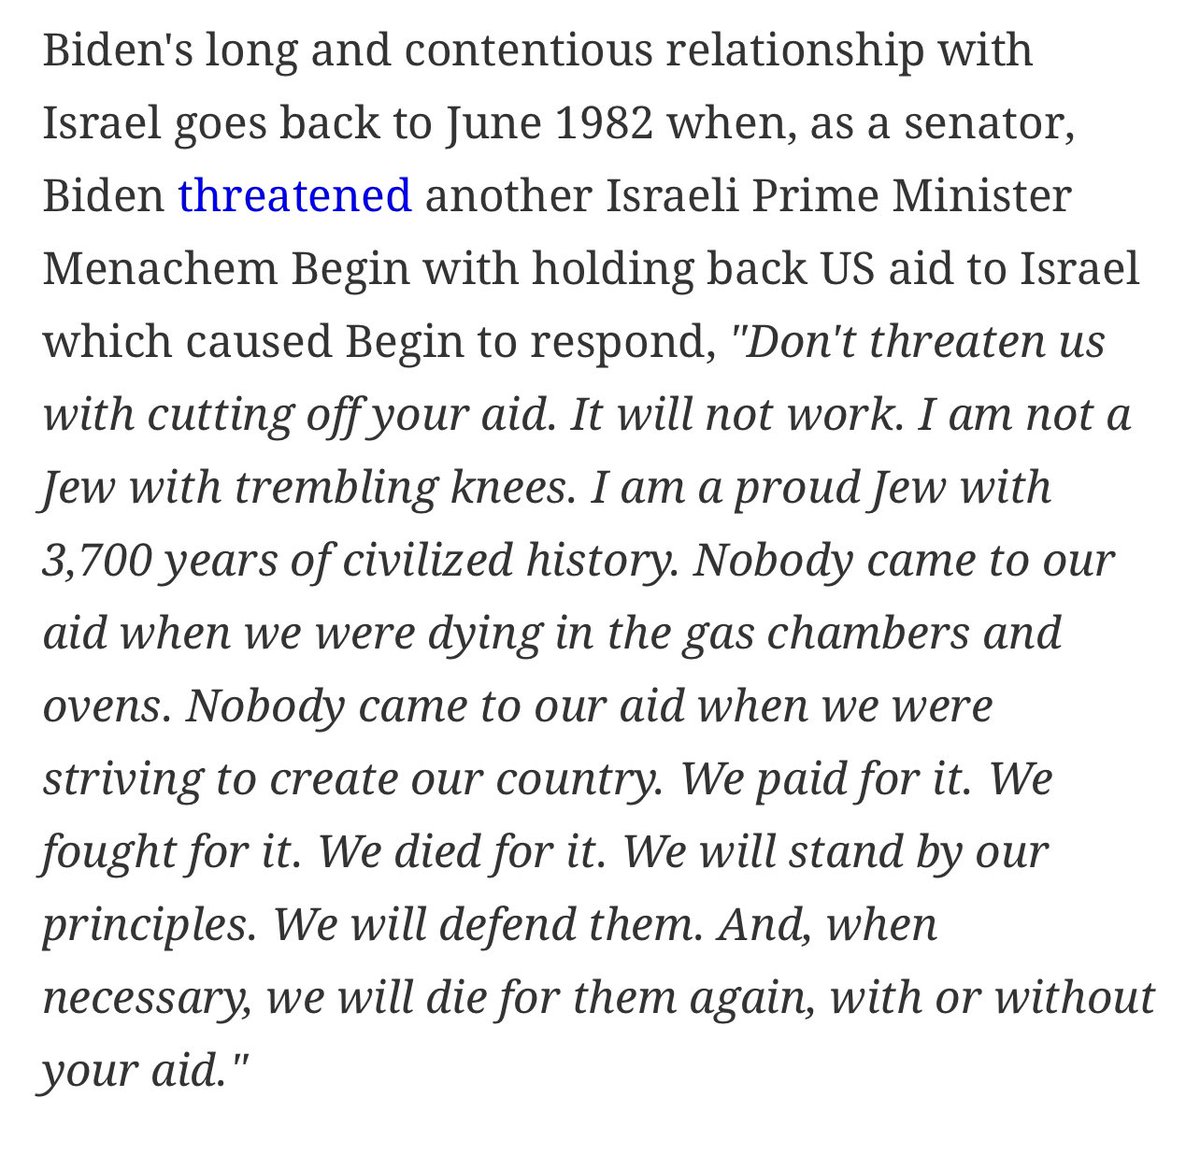 @POTUS disdain for Israel goes back years. This is not about humanitarian issues but simply his anti-Israel and antisemitism in full display. #FJB #Jexit